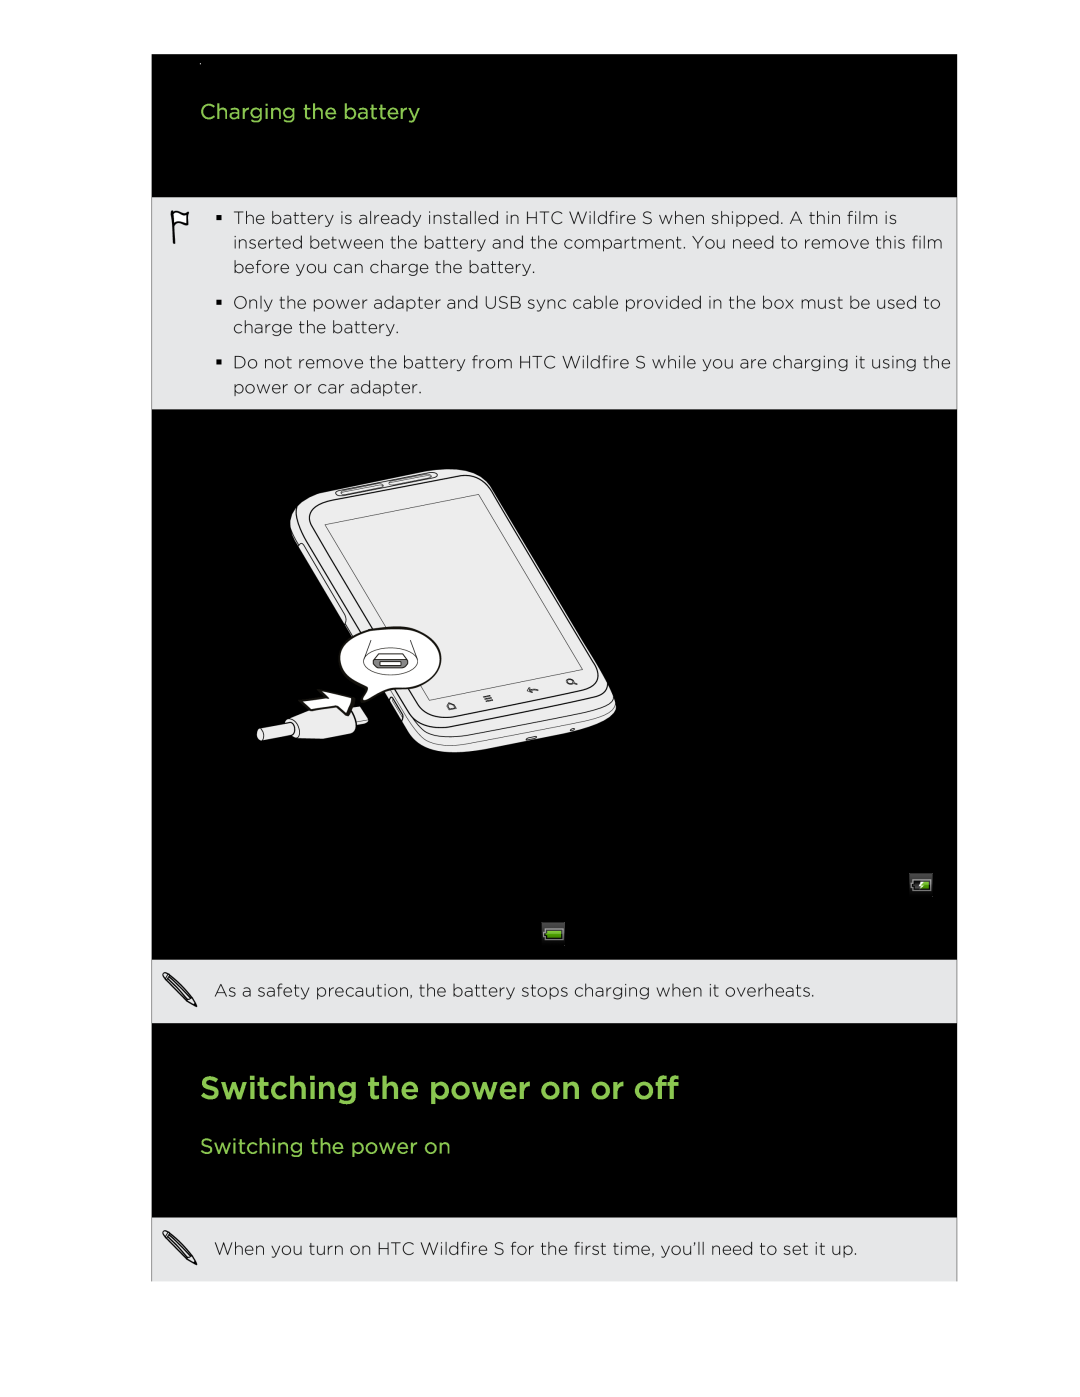 HTC manual Switching the power on or off, Charging the battery 